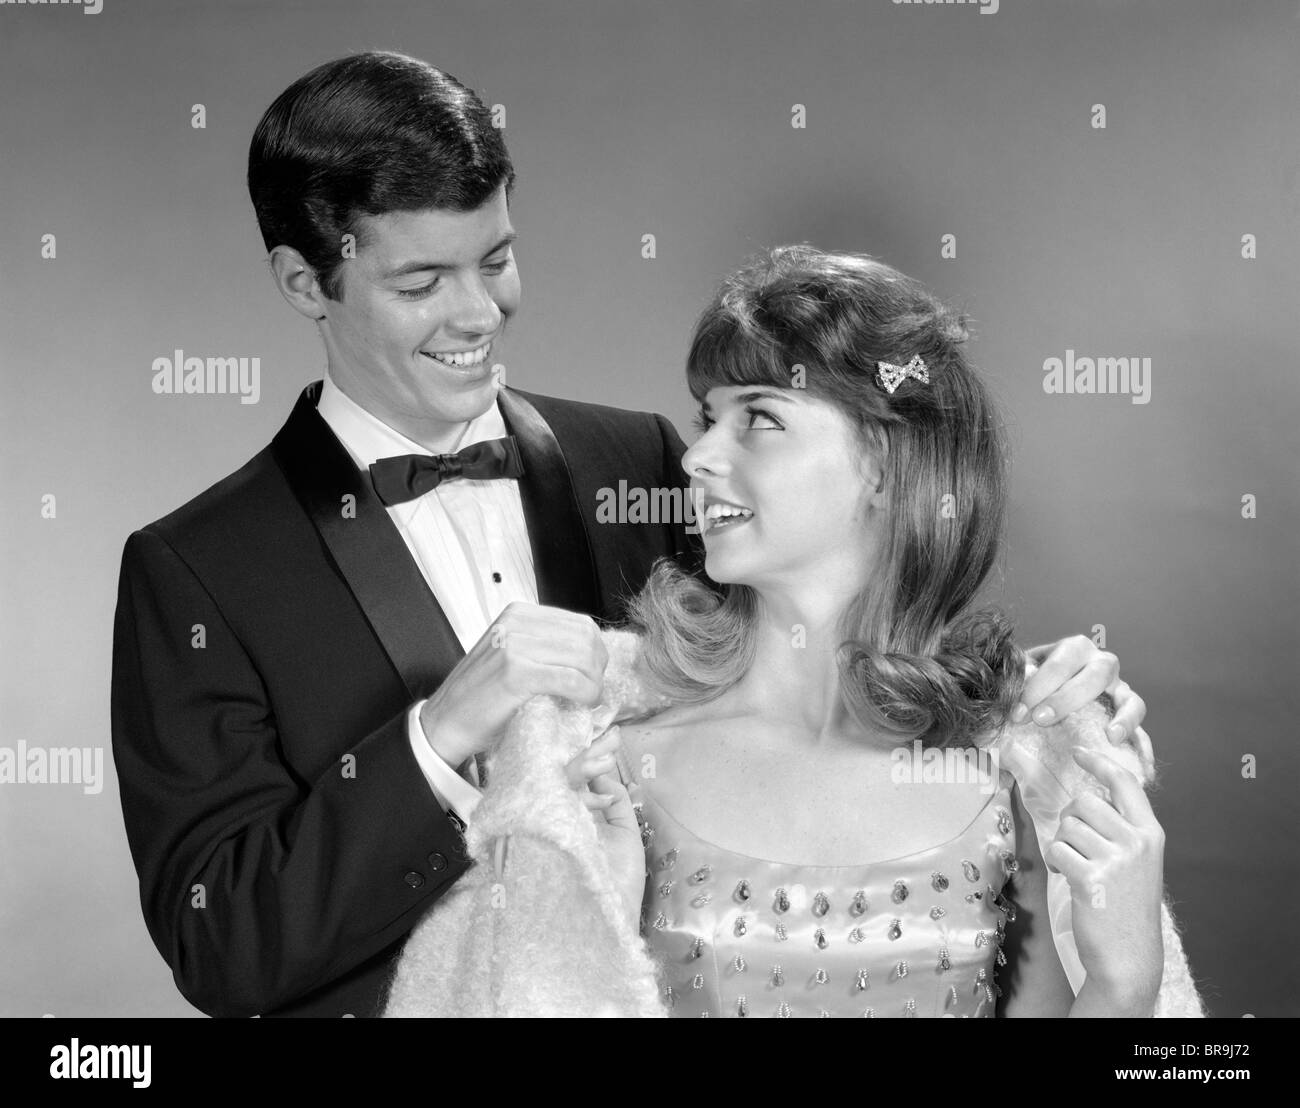 1960s TEEN COUPLE FORMALLY DRESSED BOY HELPING GIRL ON WITH COAT TO GO TO PROM Stock Photo